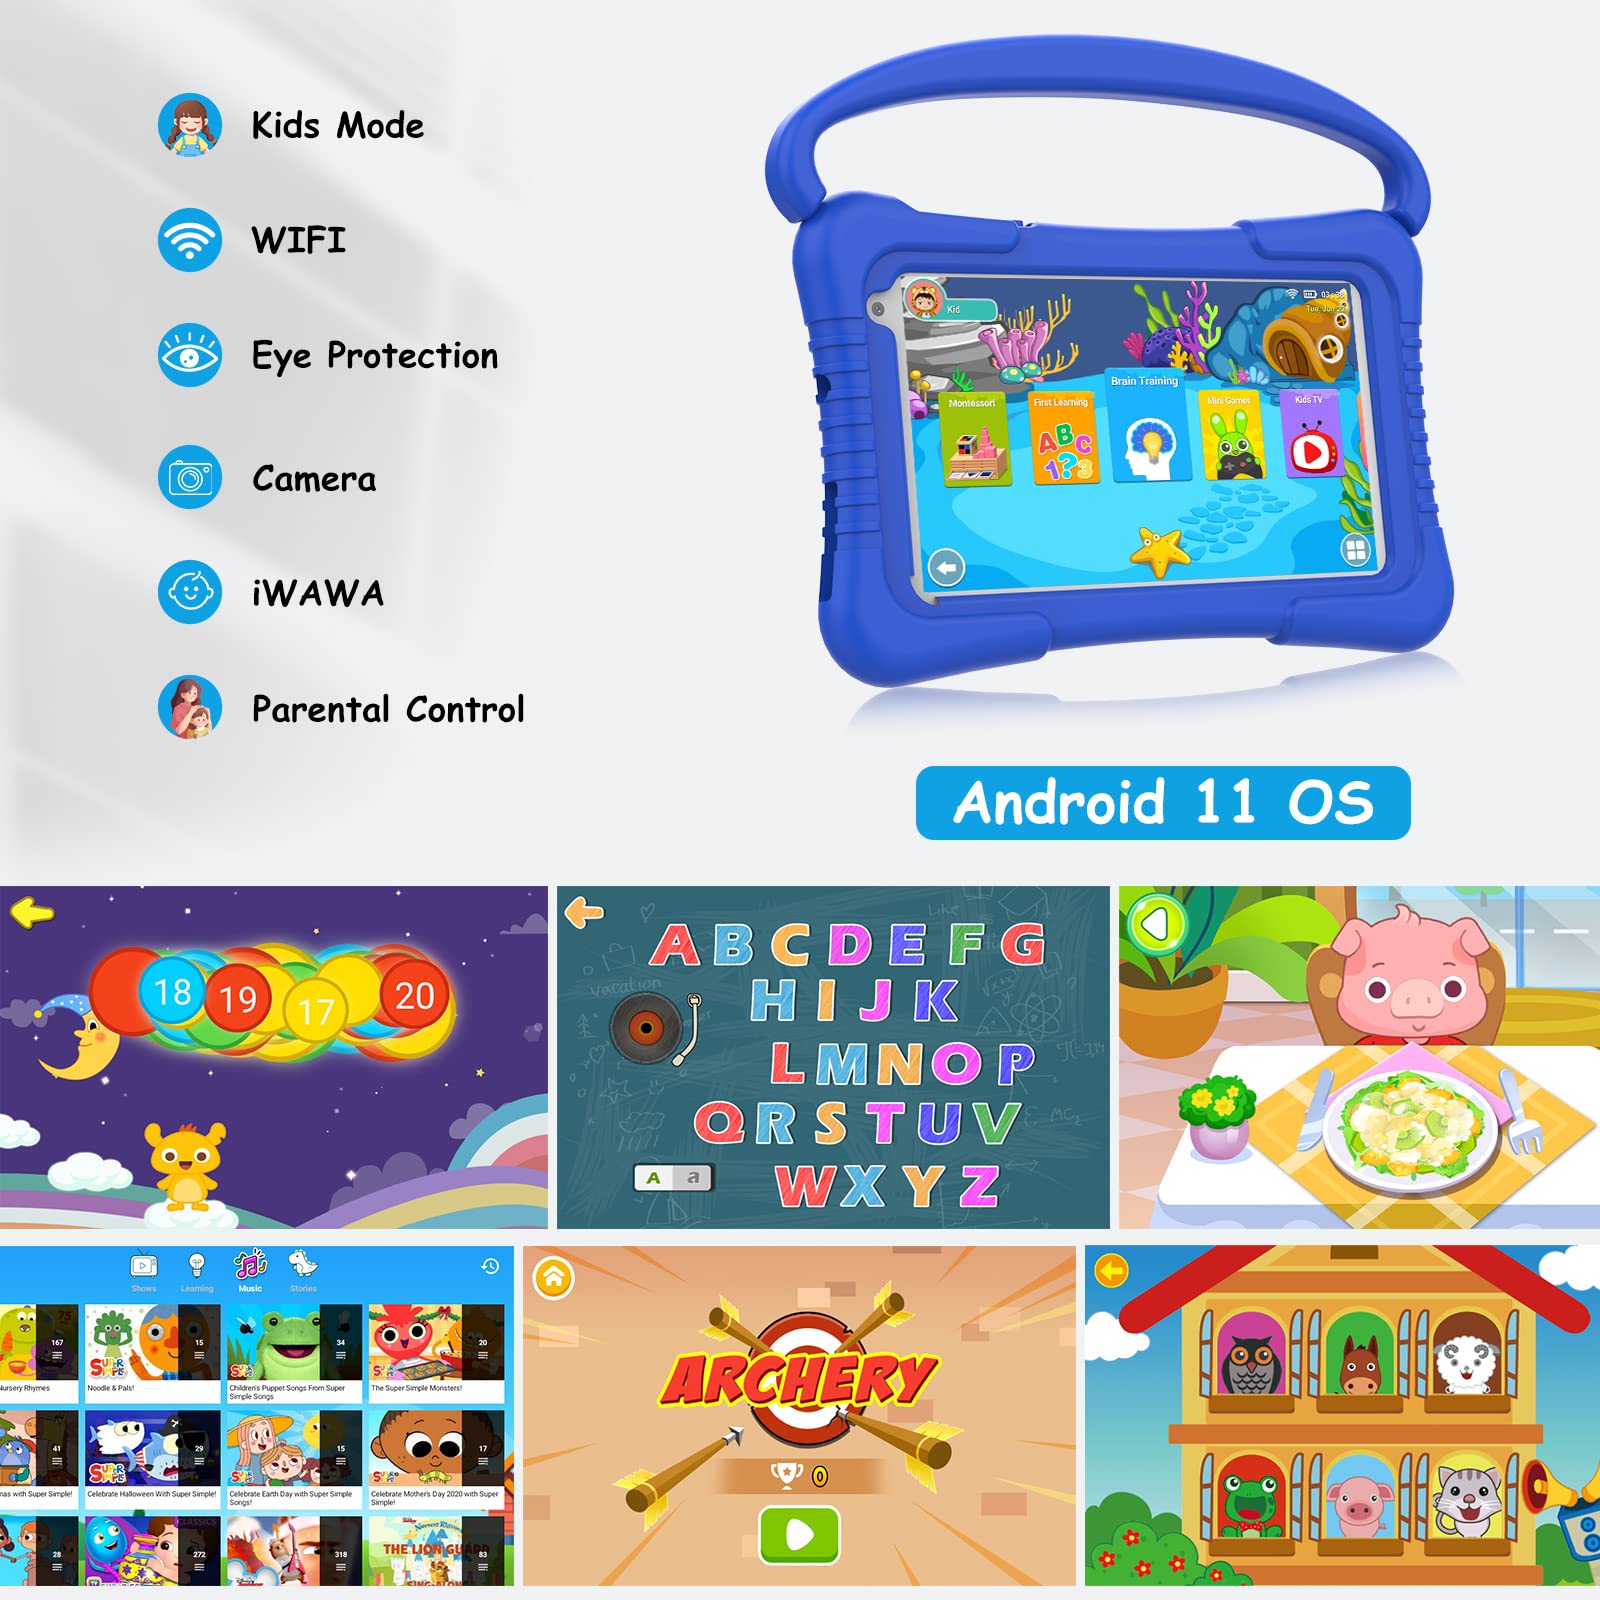 7 Inch Kids Tablet, Quad Core Android 11 Toddler Tablets, Children Tablet with 32GB Storage 2GB RAM WiFi BT Shockproof Case Dual Camera Educationl Games Parental Control, Kids Software Pre-Installed.